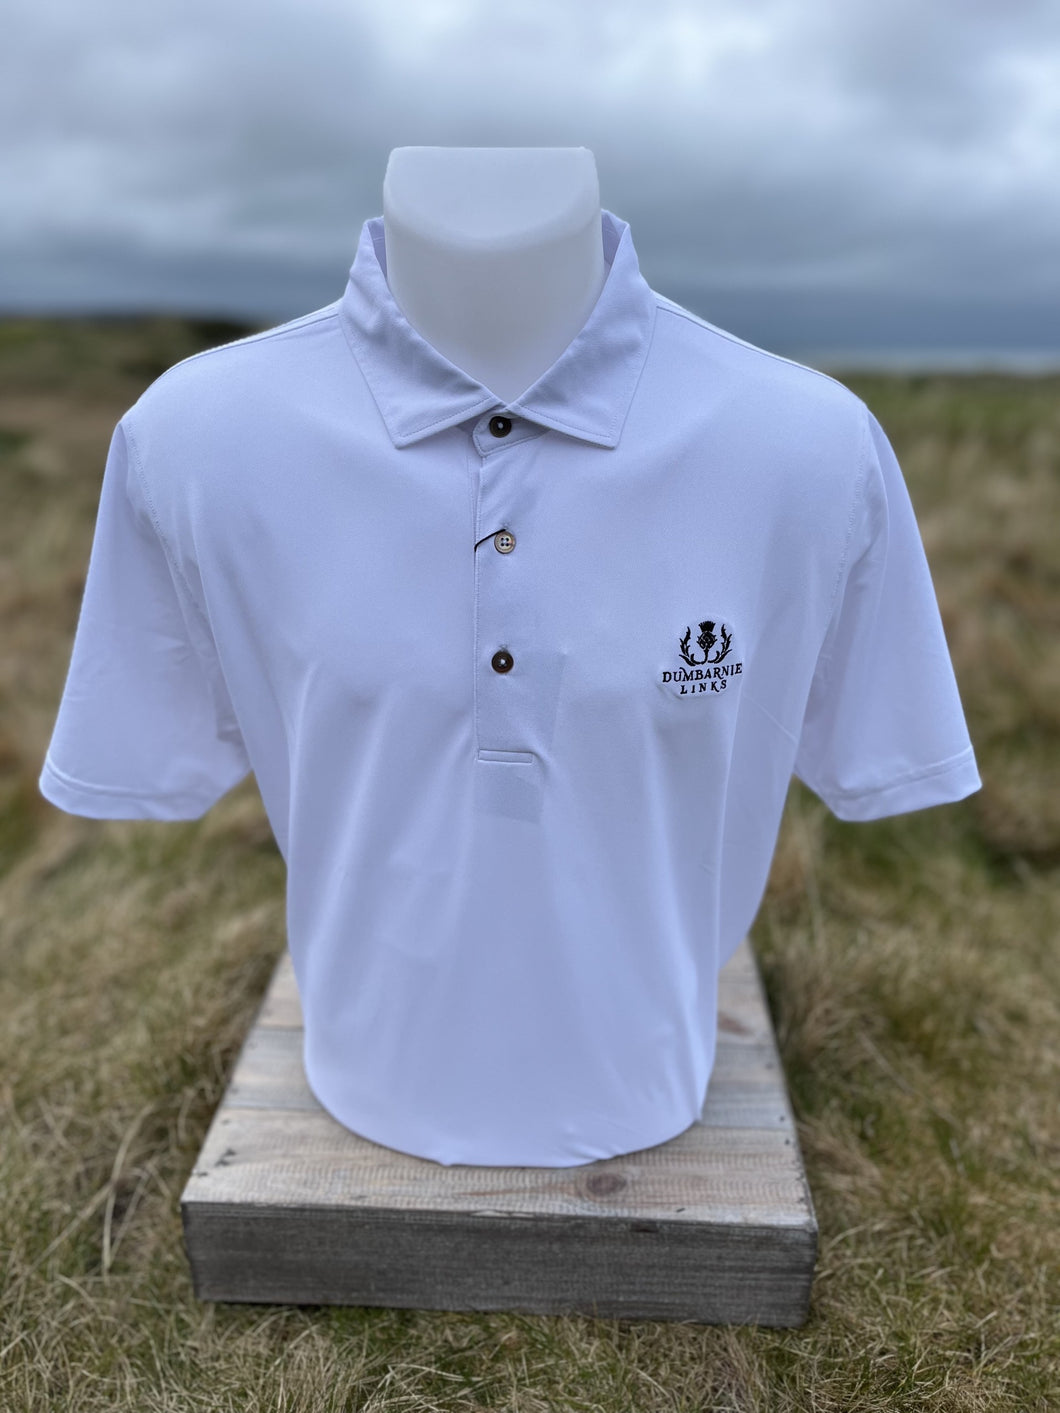 Dumbarnie Collection - Men's Pique Polo - Mix and Match - 2 for £100!